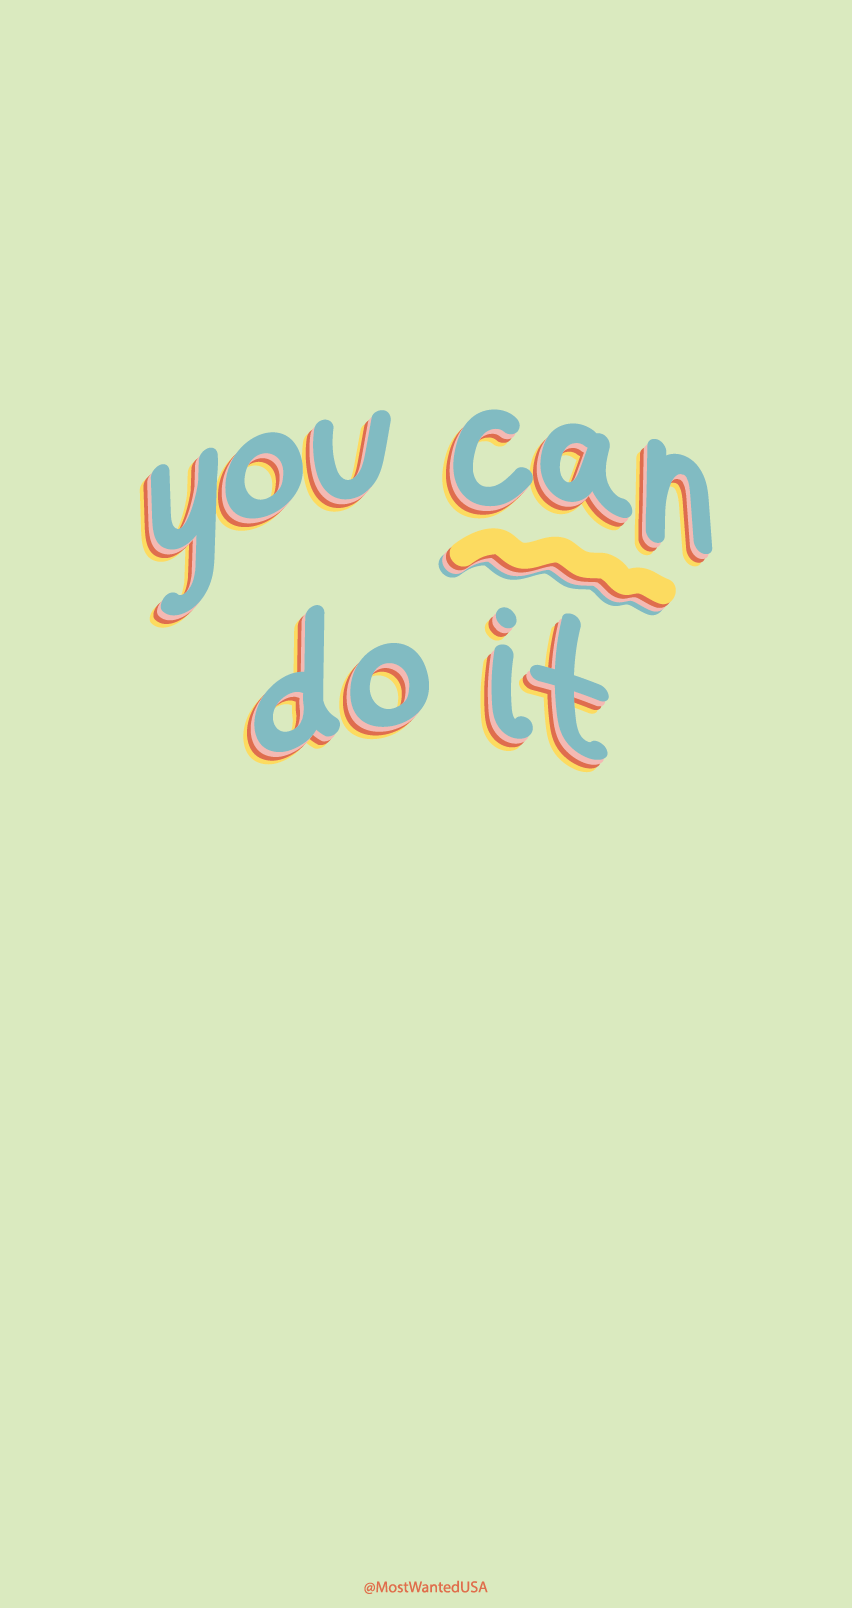 Yes you can HD wallpapers  Pxfuel